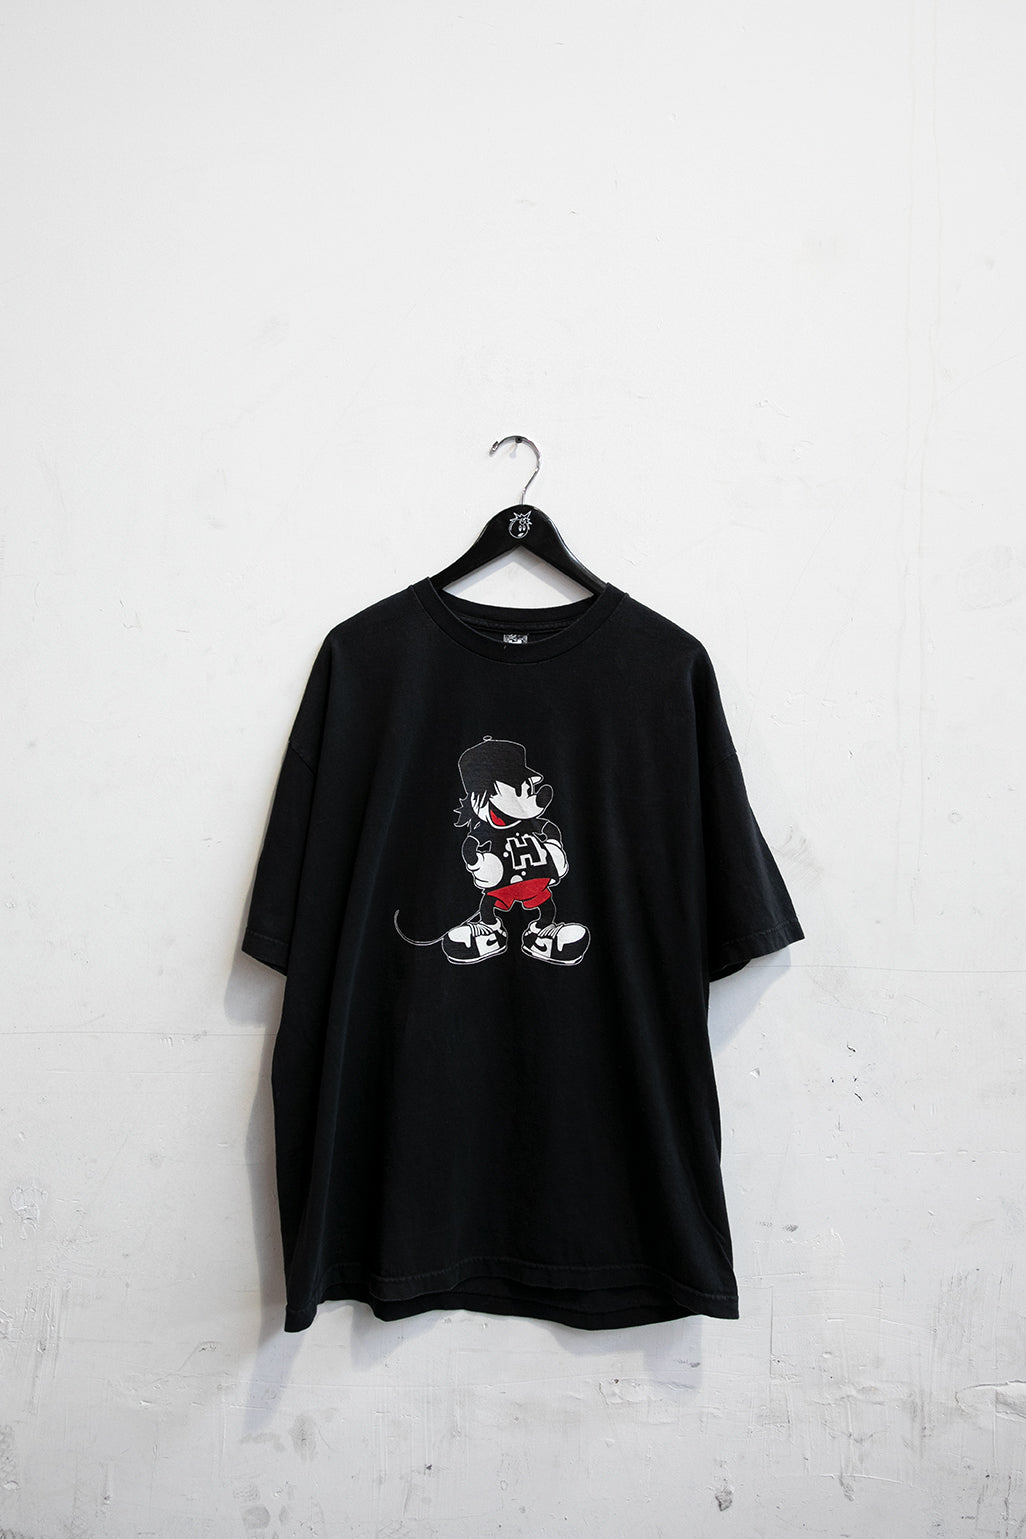 – Mousey T-Shirt The Hundreds